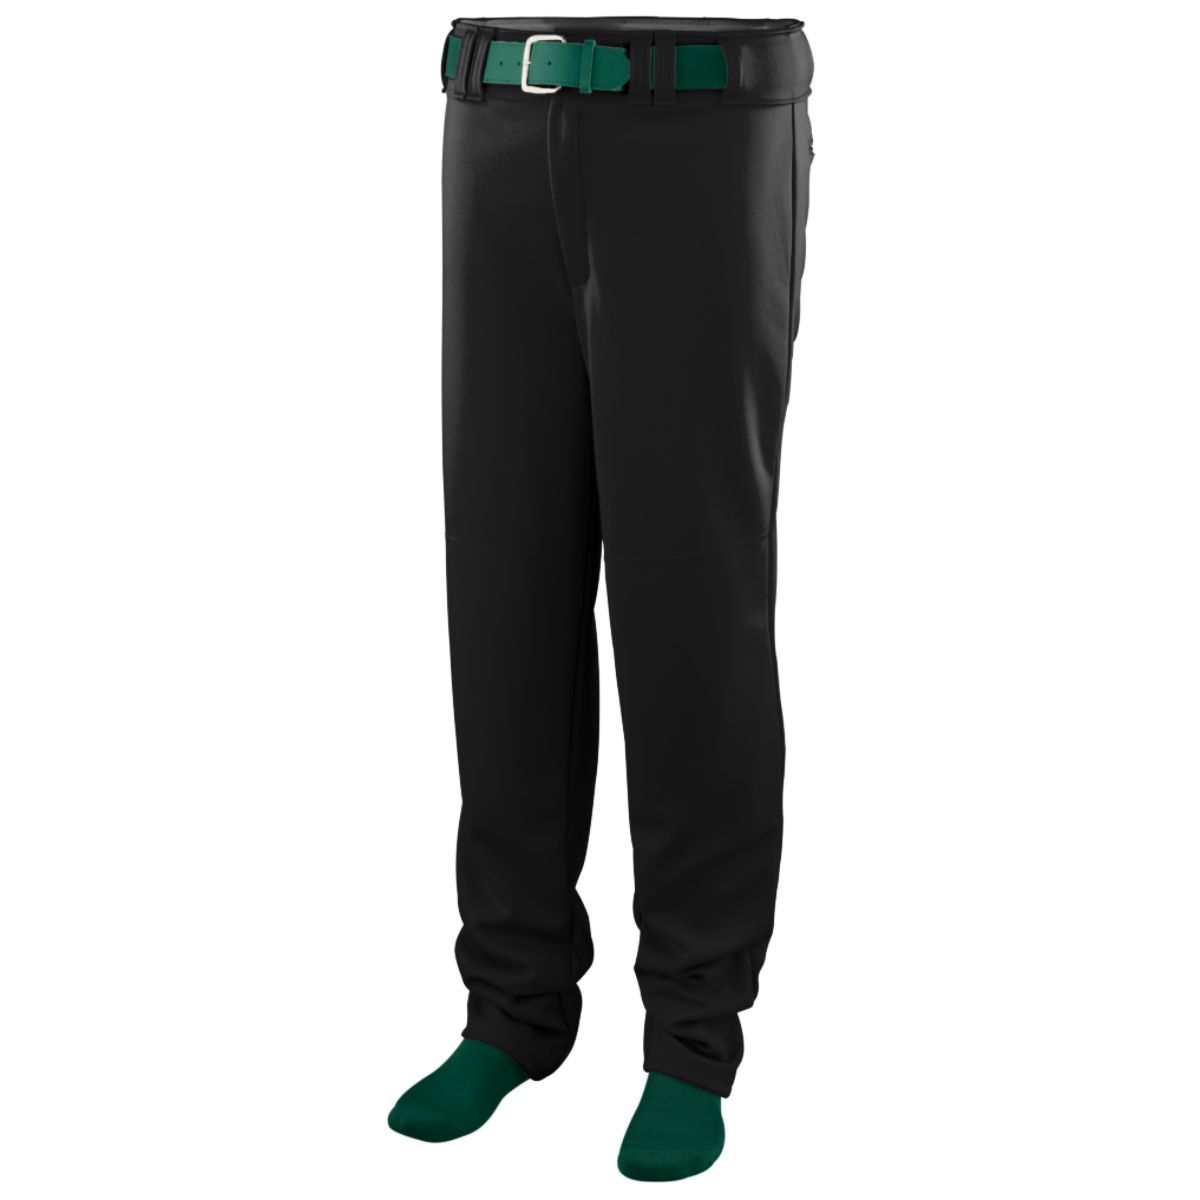 Augusta Sportswear Series Baseball/Softball Pant in Black  -Part of the Adult, Adult-Pants, Pants, Augusta-Products, Baseball, All-Sports, All-Sports-1 product lines at KanaleyCreations.com